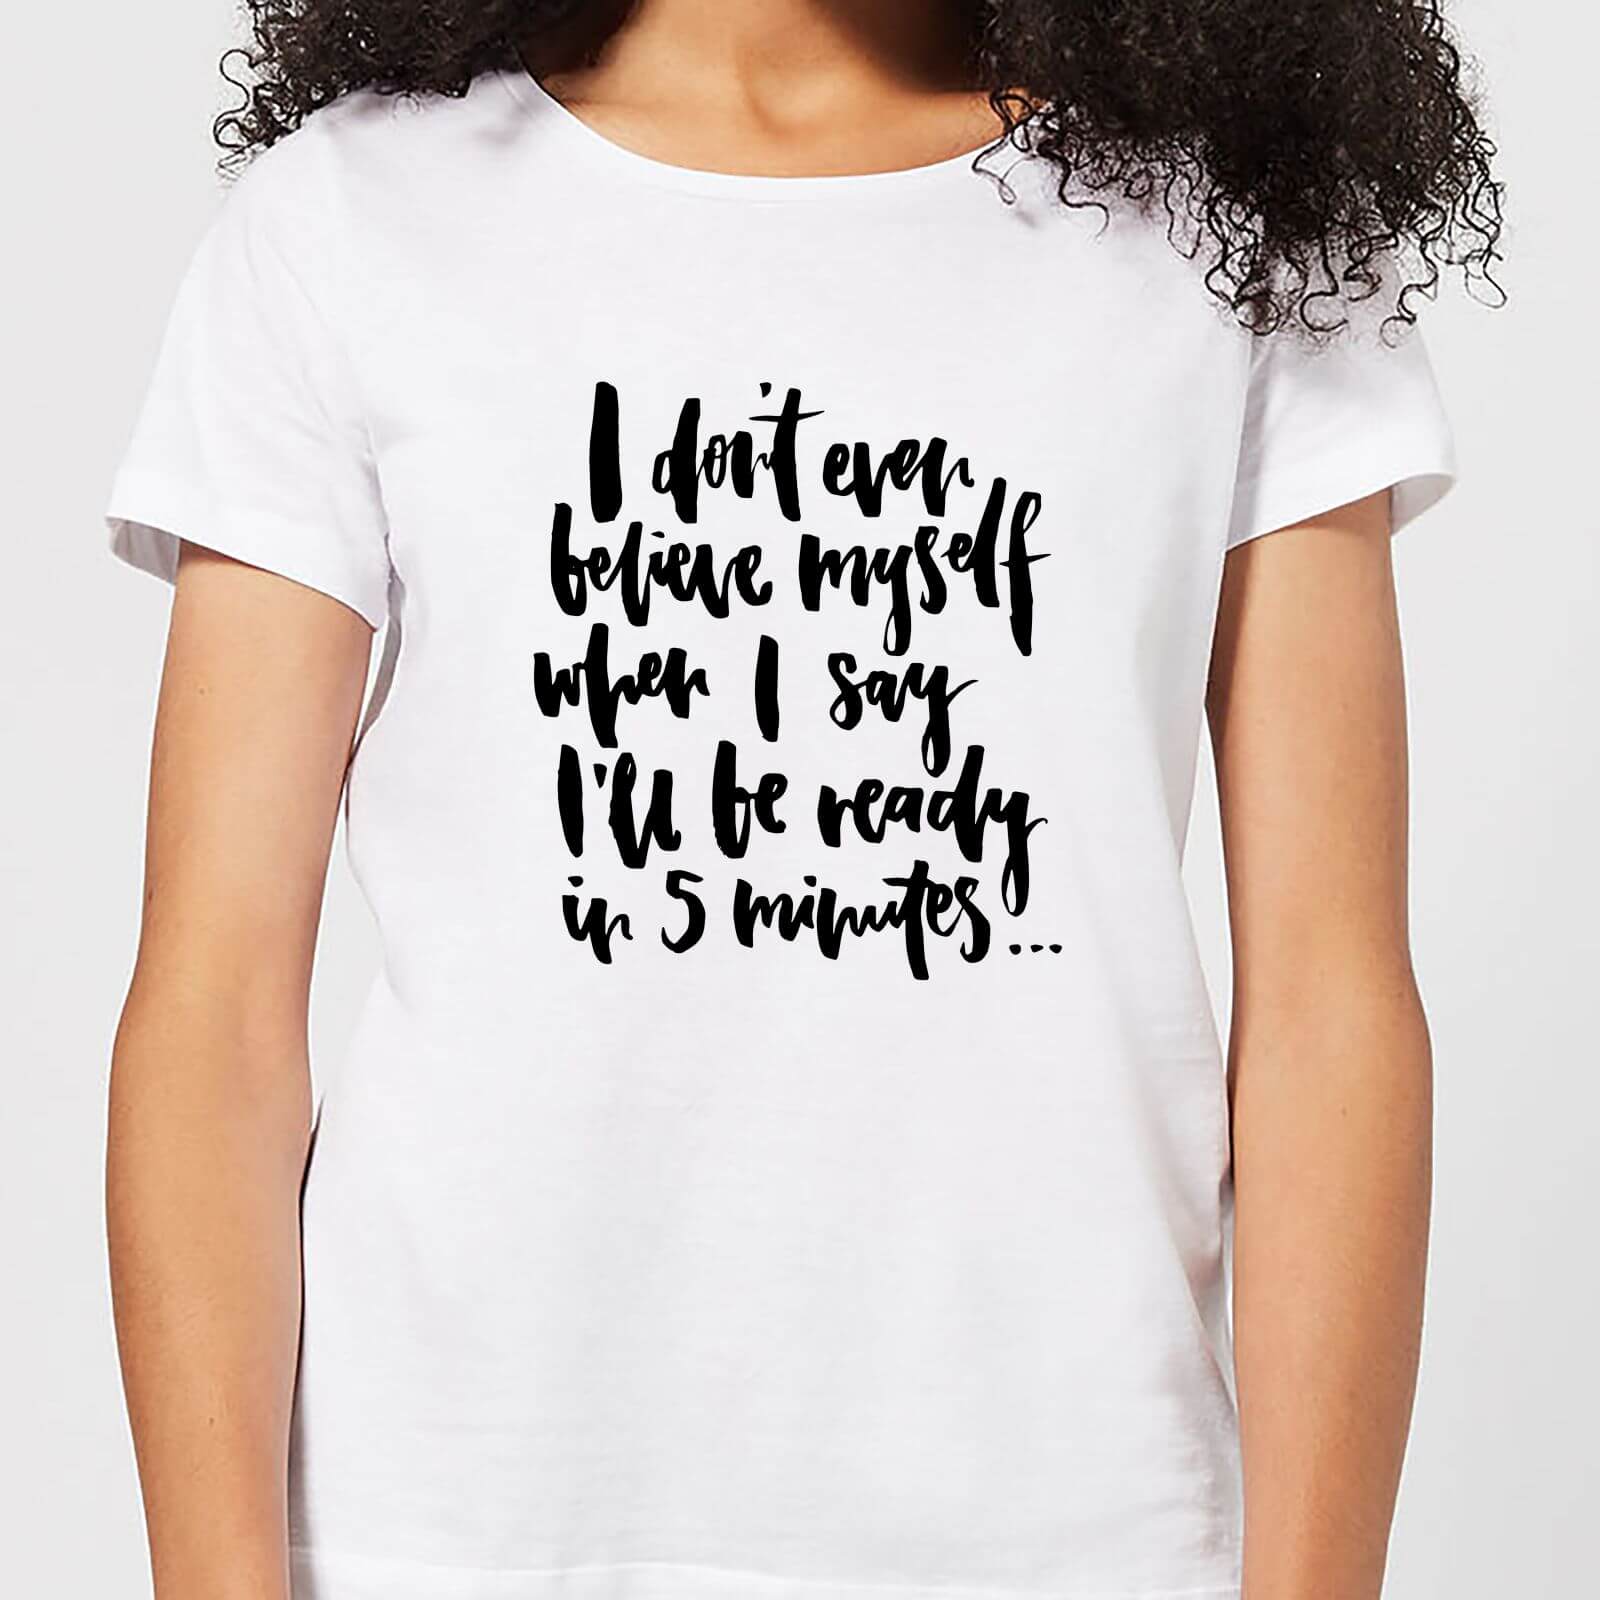 I Don't Even Believe Myself When I Say I'll Be Ready In 5 Minutes Women's T-Shirt - White - M - White